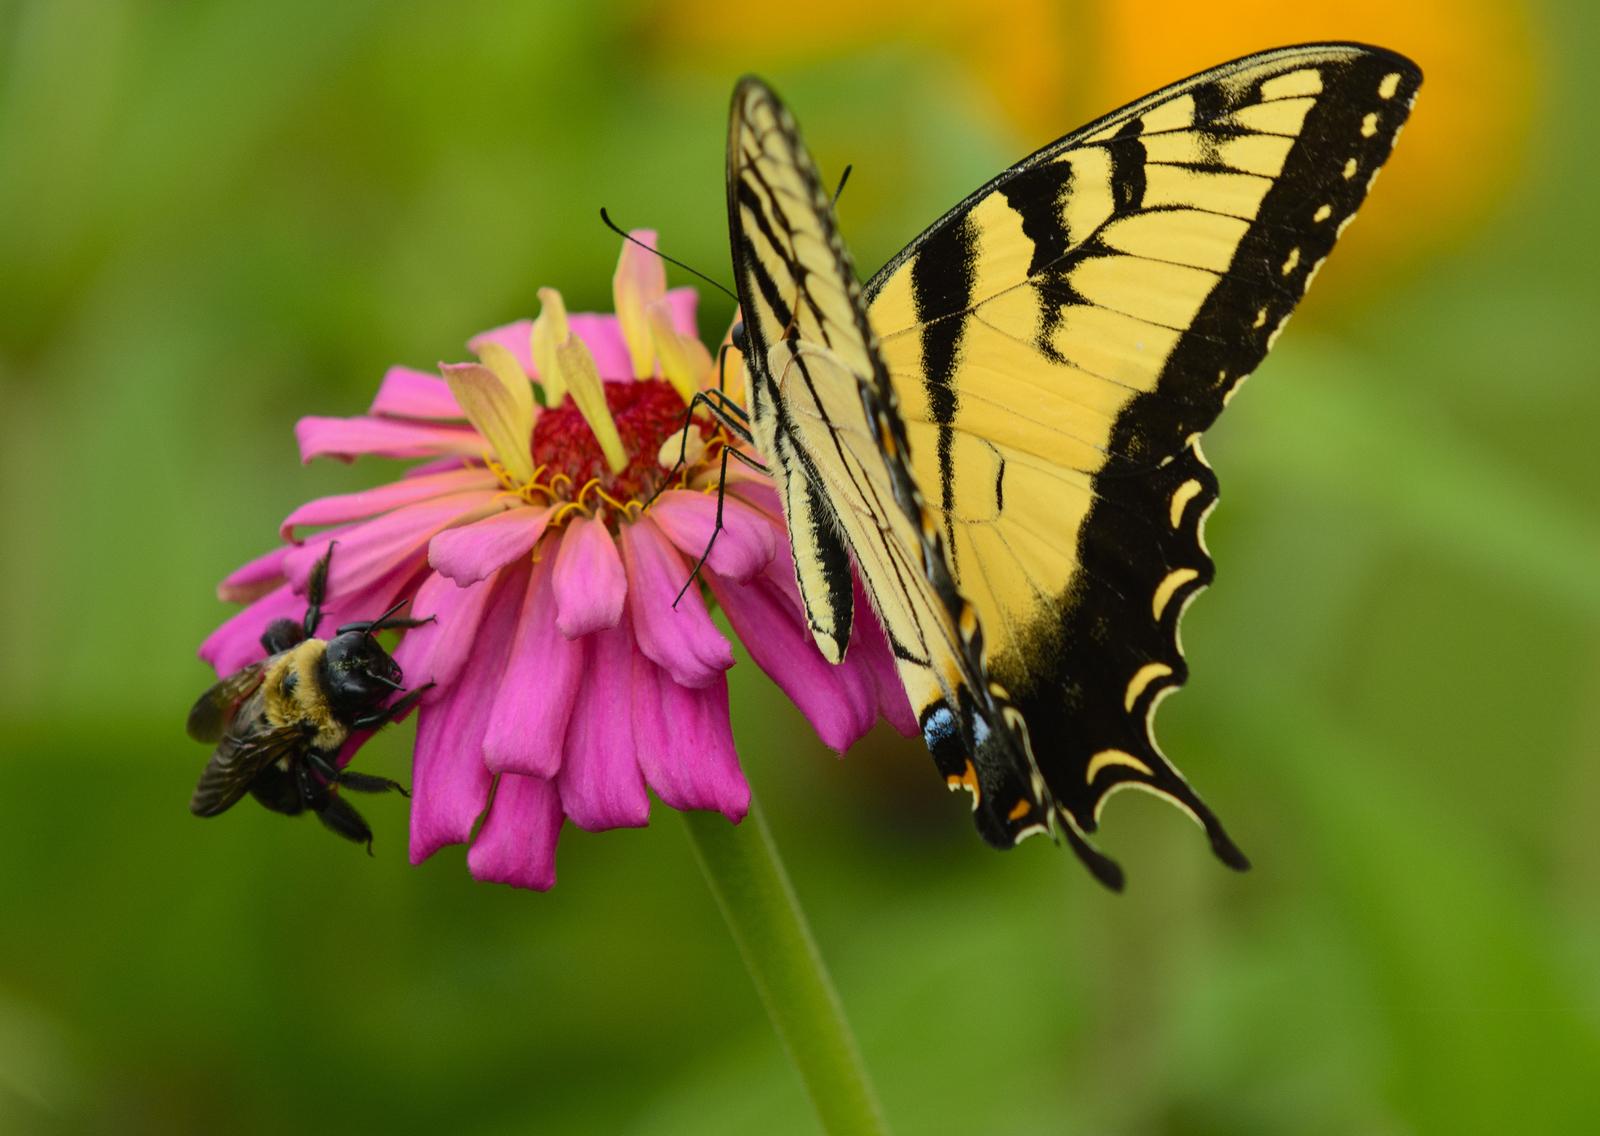 Can You Answer All 20 of These Super Easy Trivia Questions Correctly? Butterfly and bee